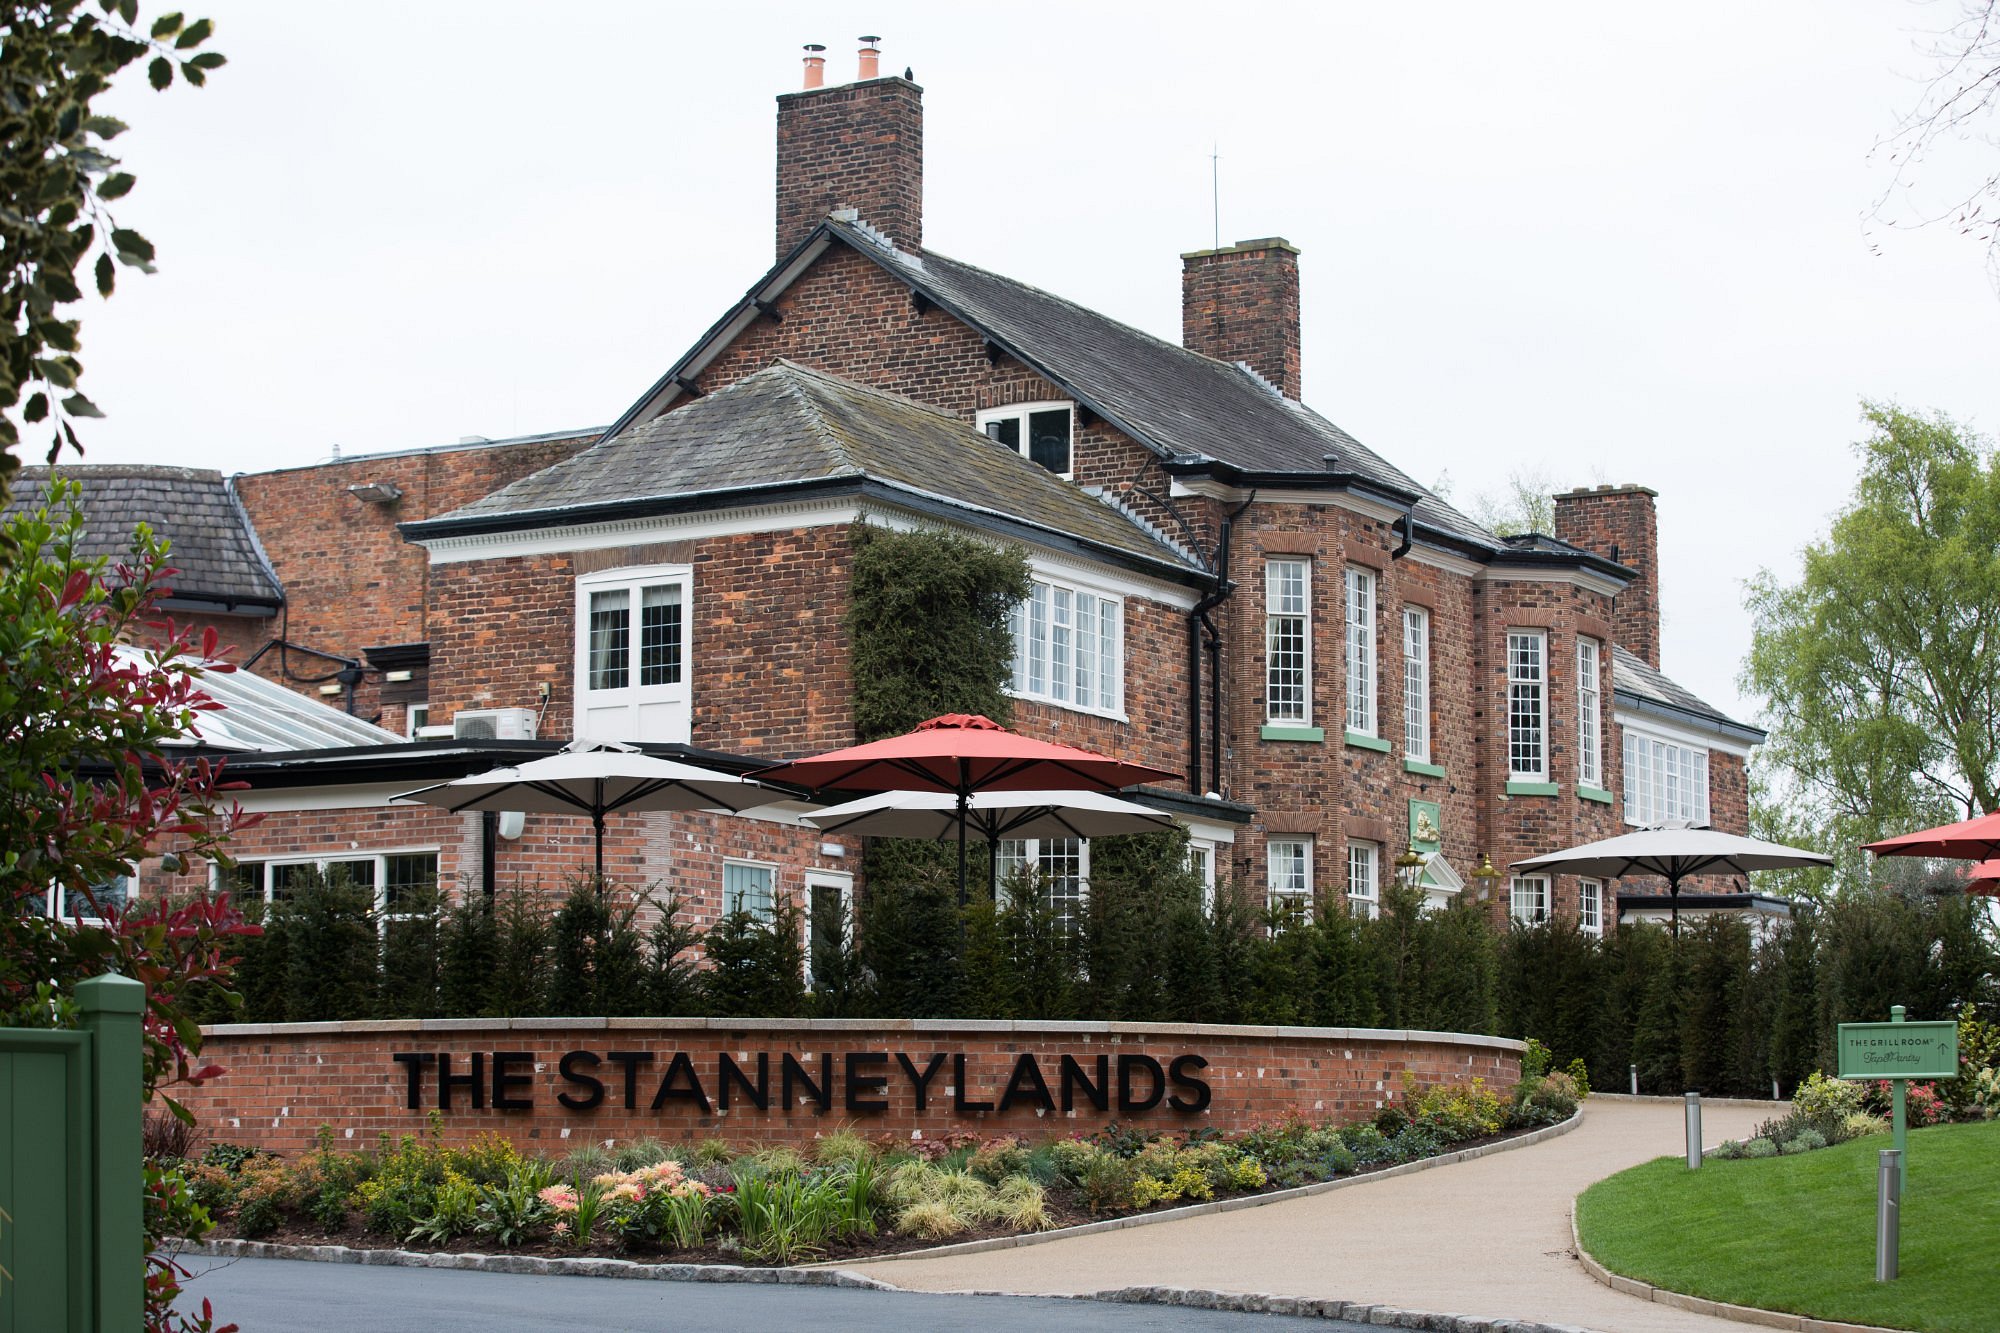 The Stanneylands image